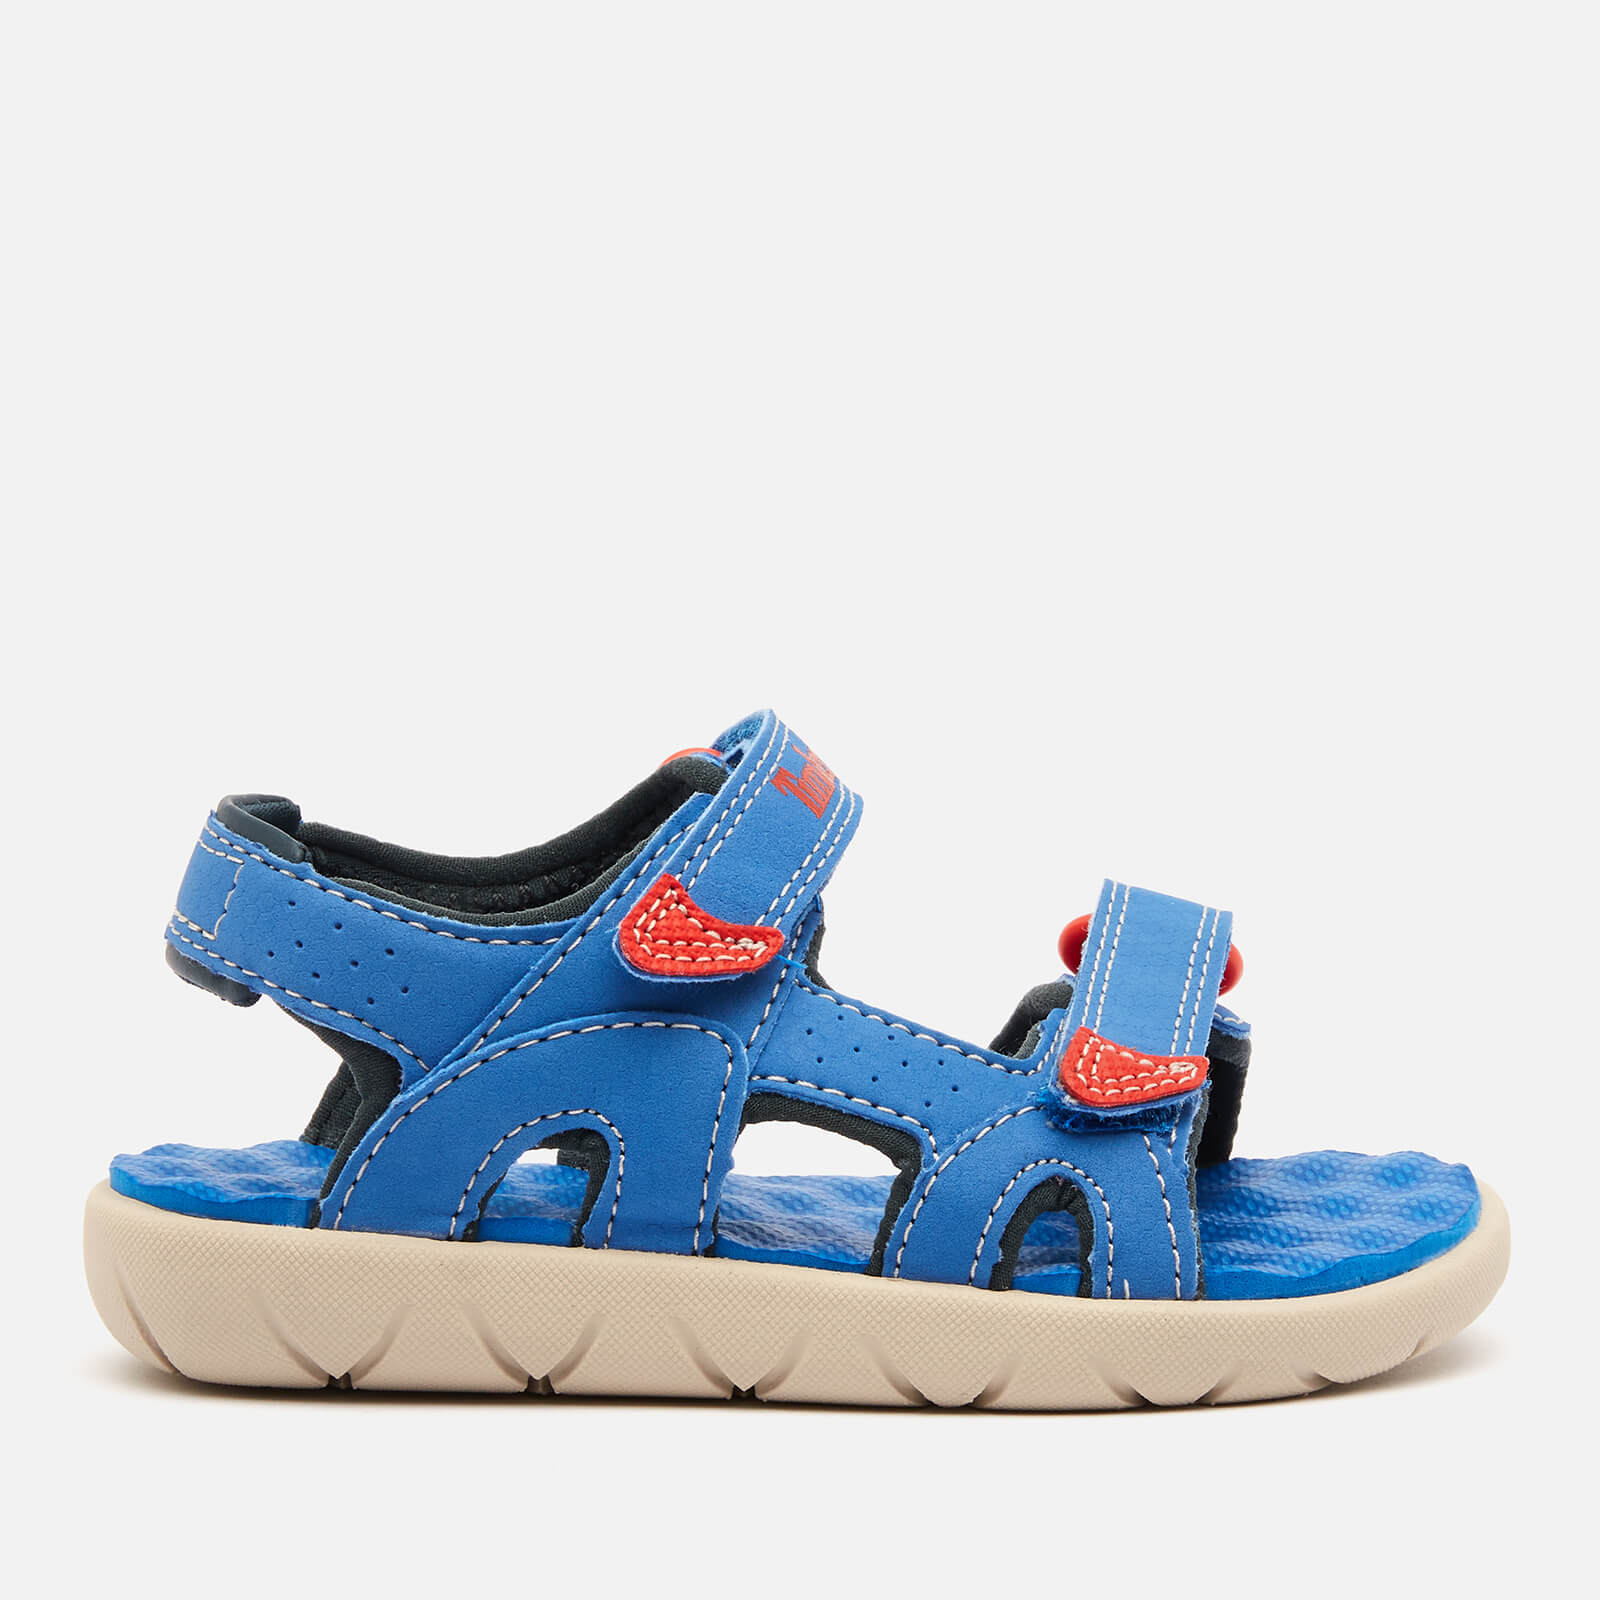 Timberland Toddlers' Perkins Row 2-Strap Sandals - Bright Blue - UK 5 Toddler